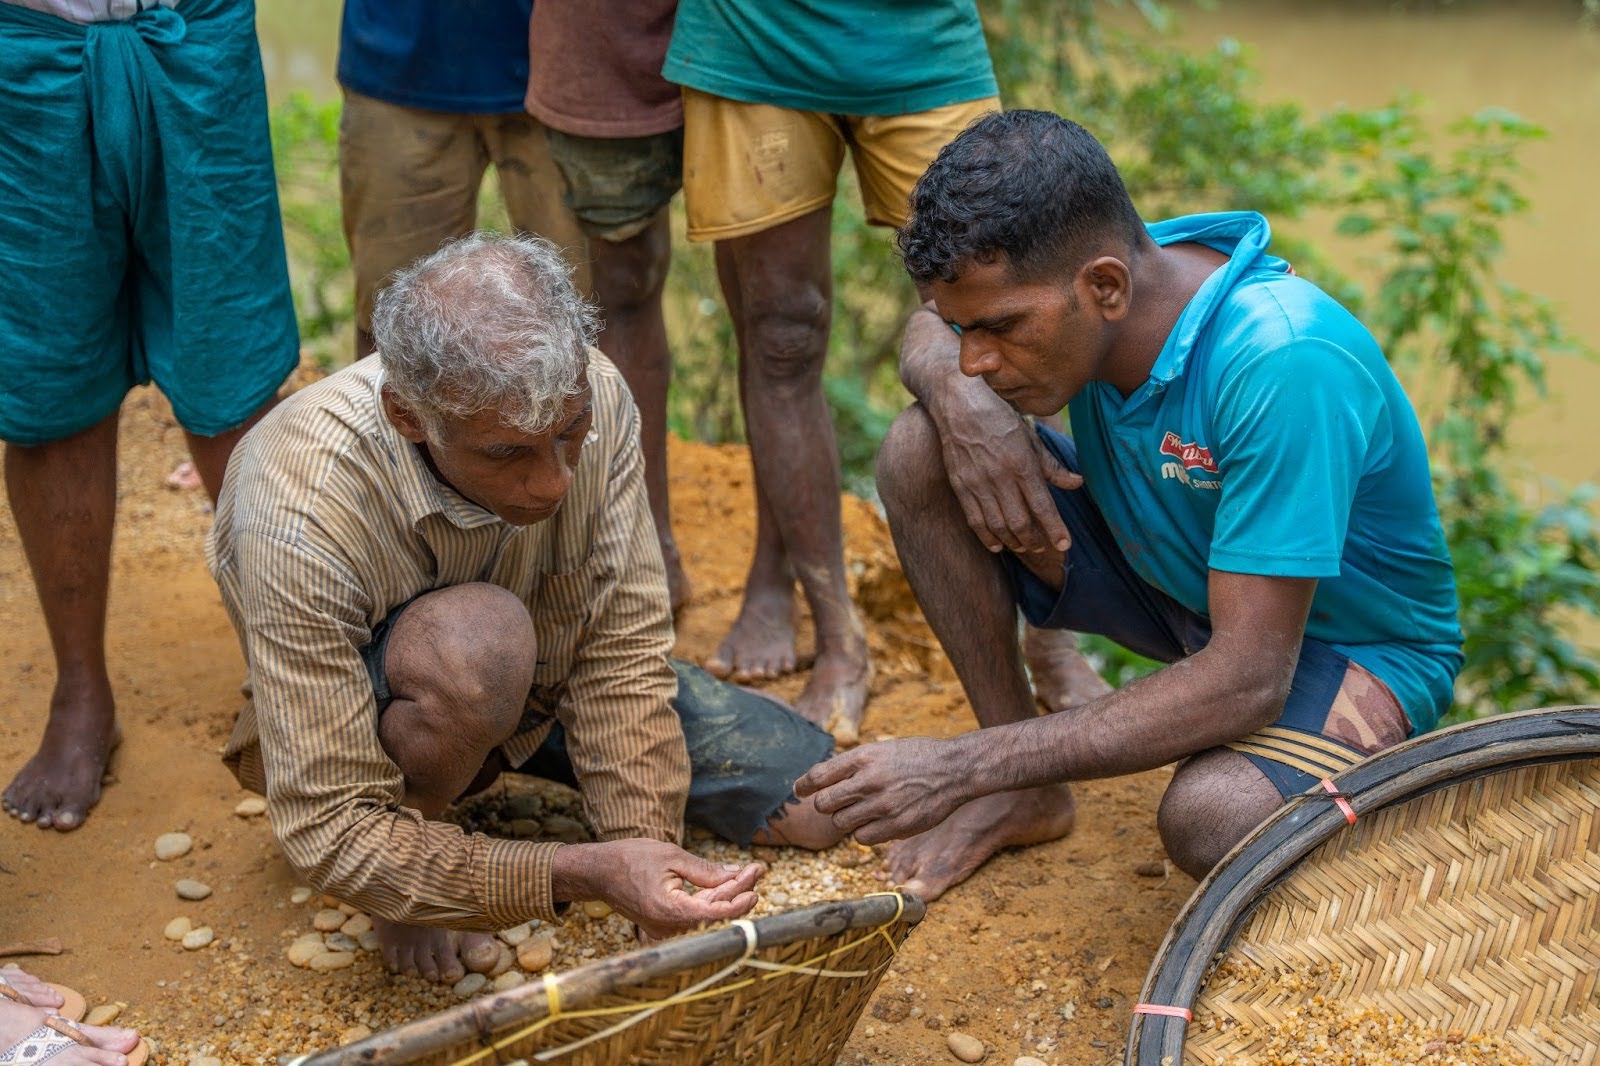 Miners in Sri Lanka carefully inspecting sifted gem-bearing gravel, known as illam, from pits after thorough washing